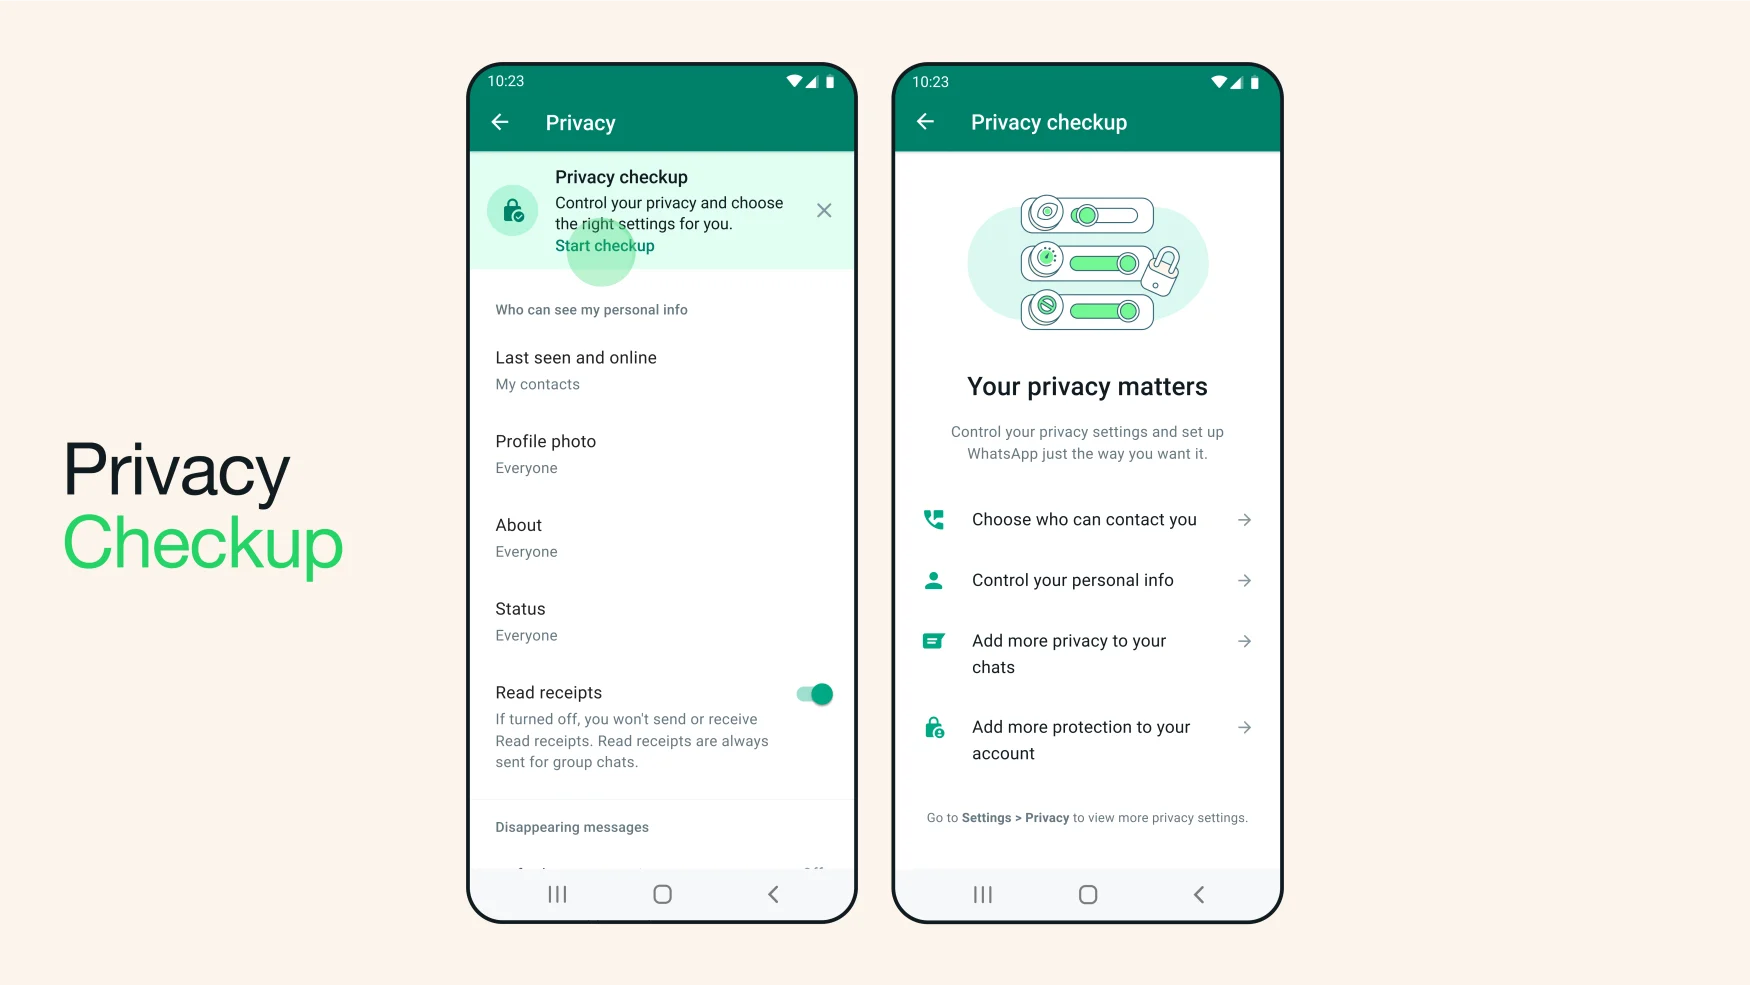 WhatsApp's new privacy features include the silencing of unknown callers